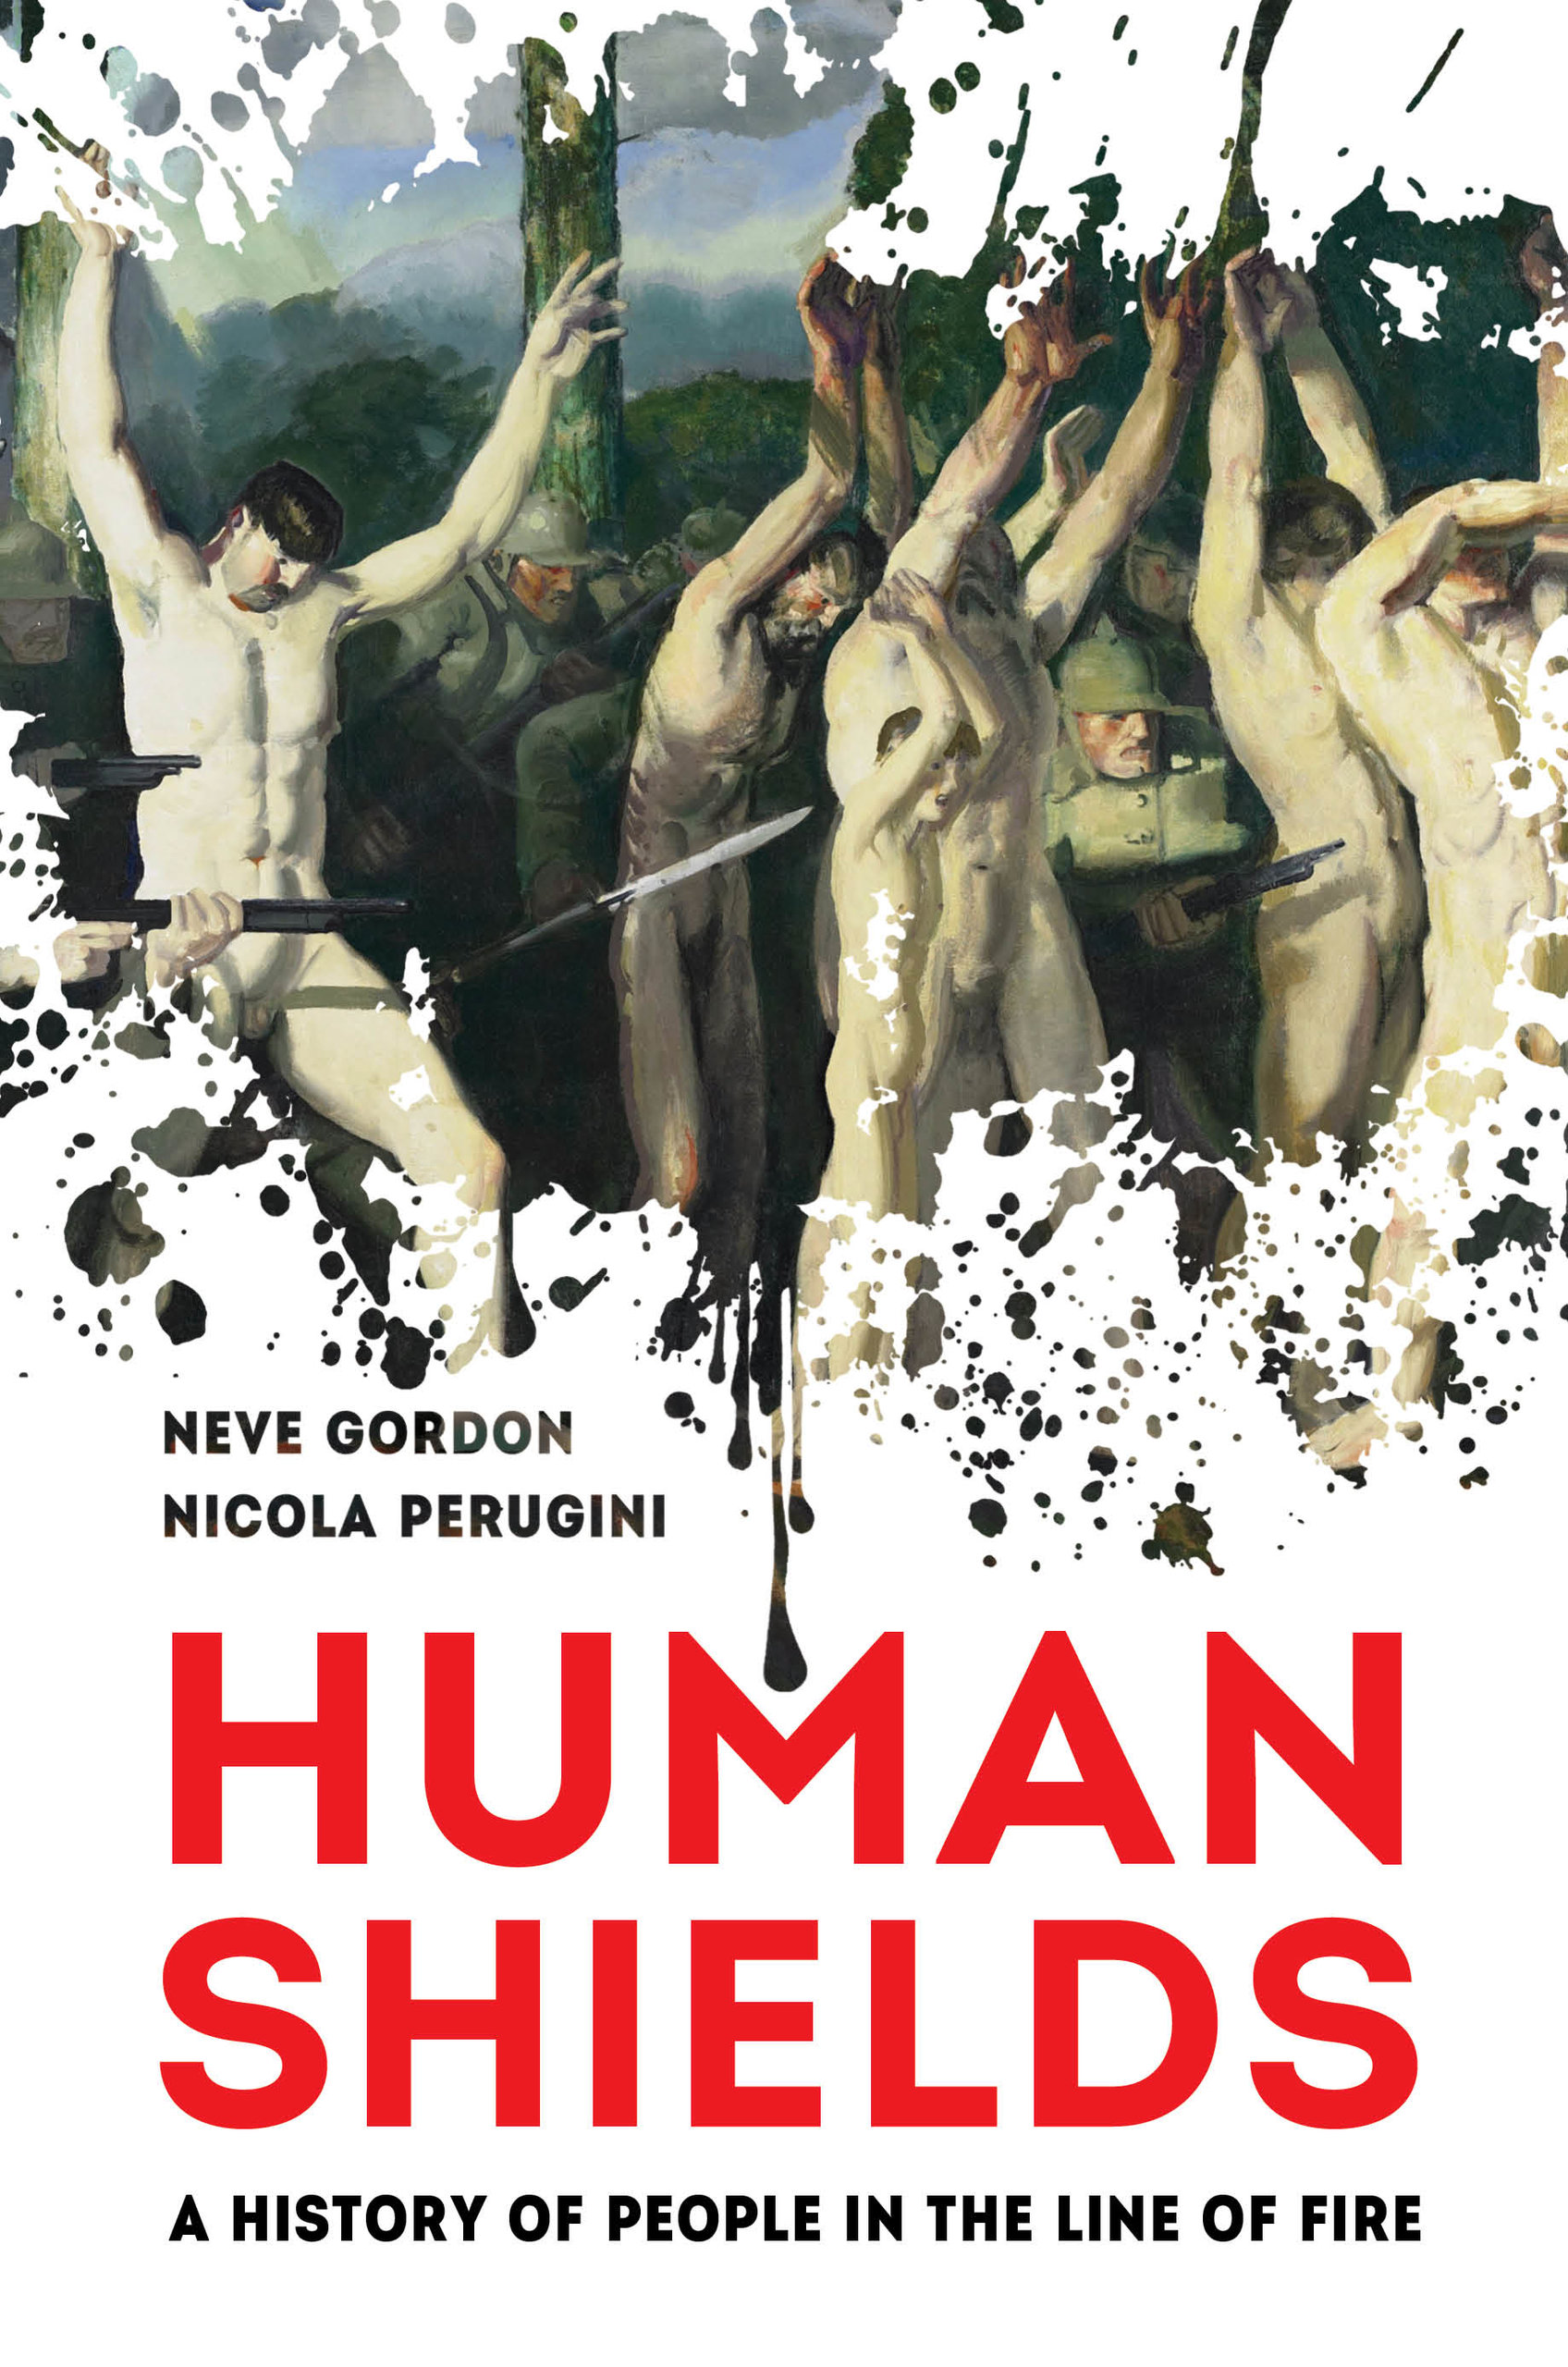 Book Cover - Human Shields: A History of People in the Line of Fire